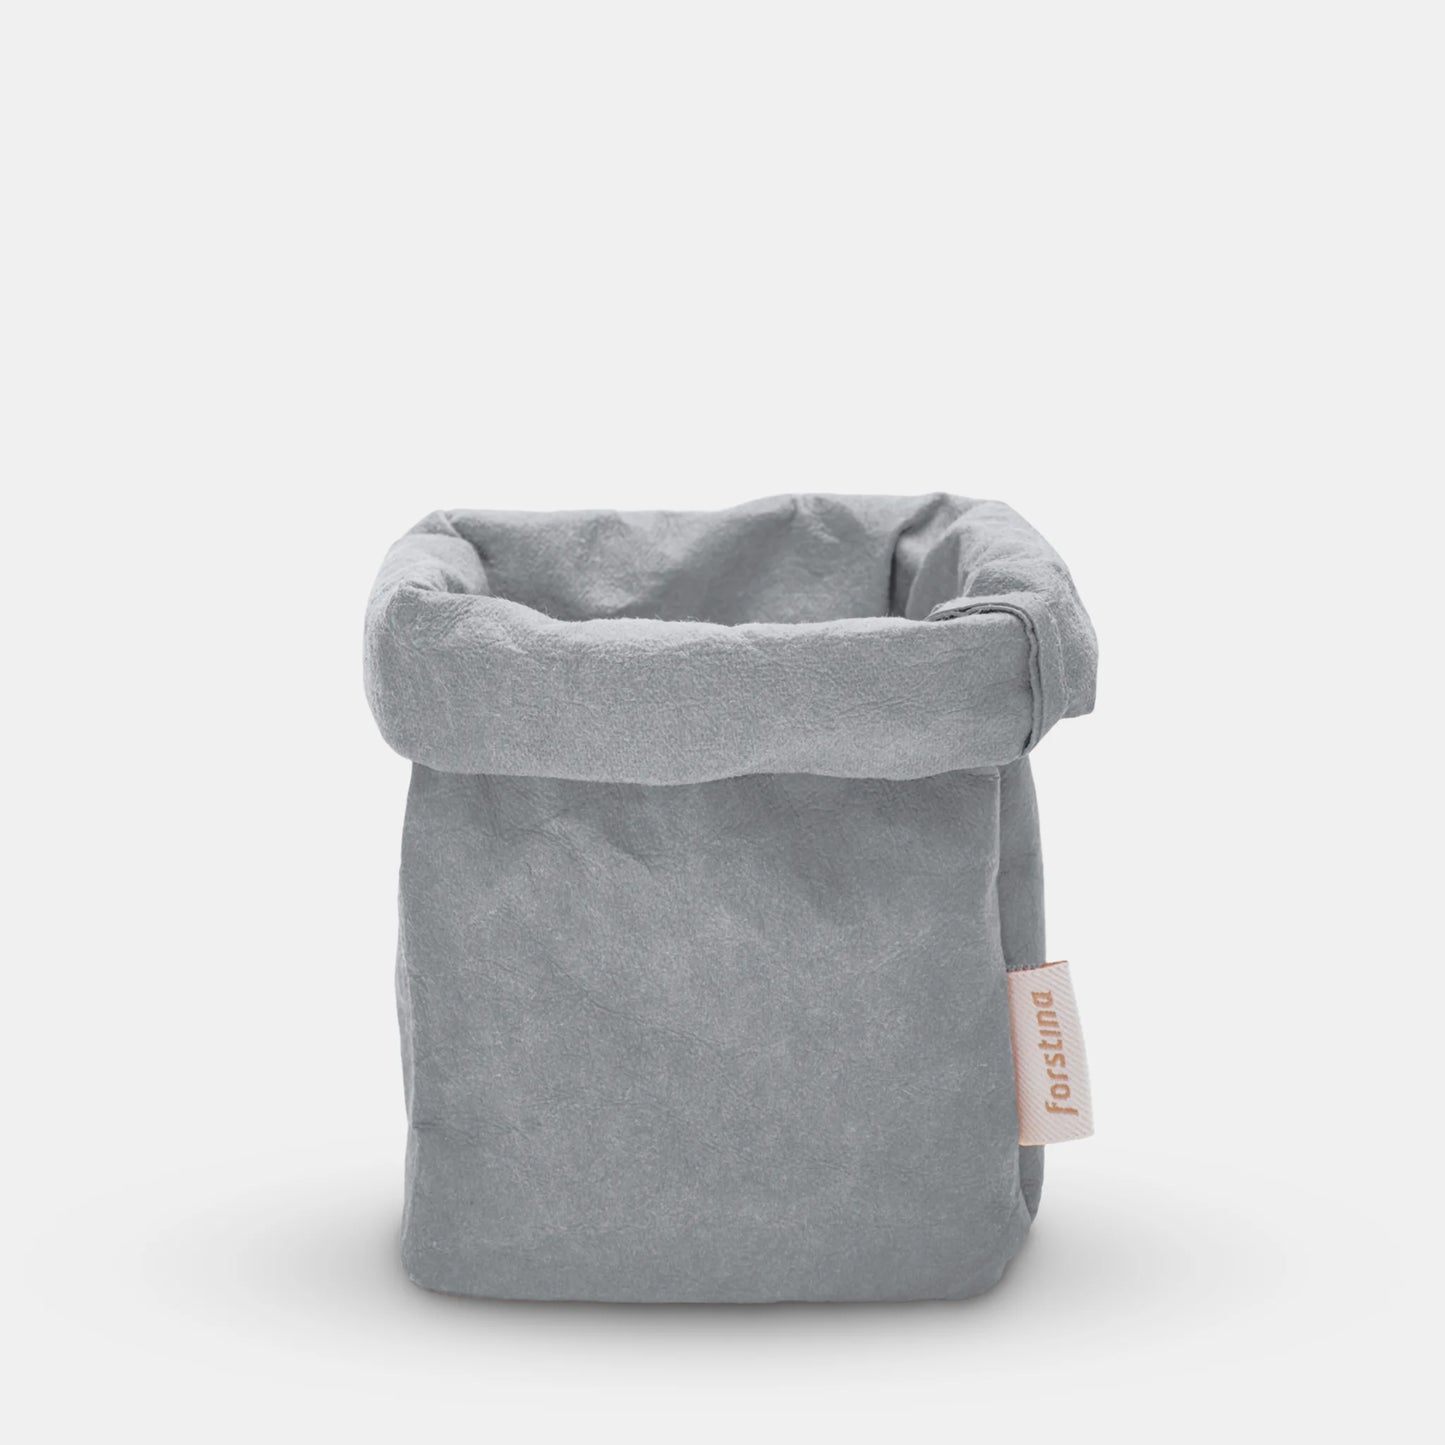 forstina small washable paper bag with gray (stone) color white background.